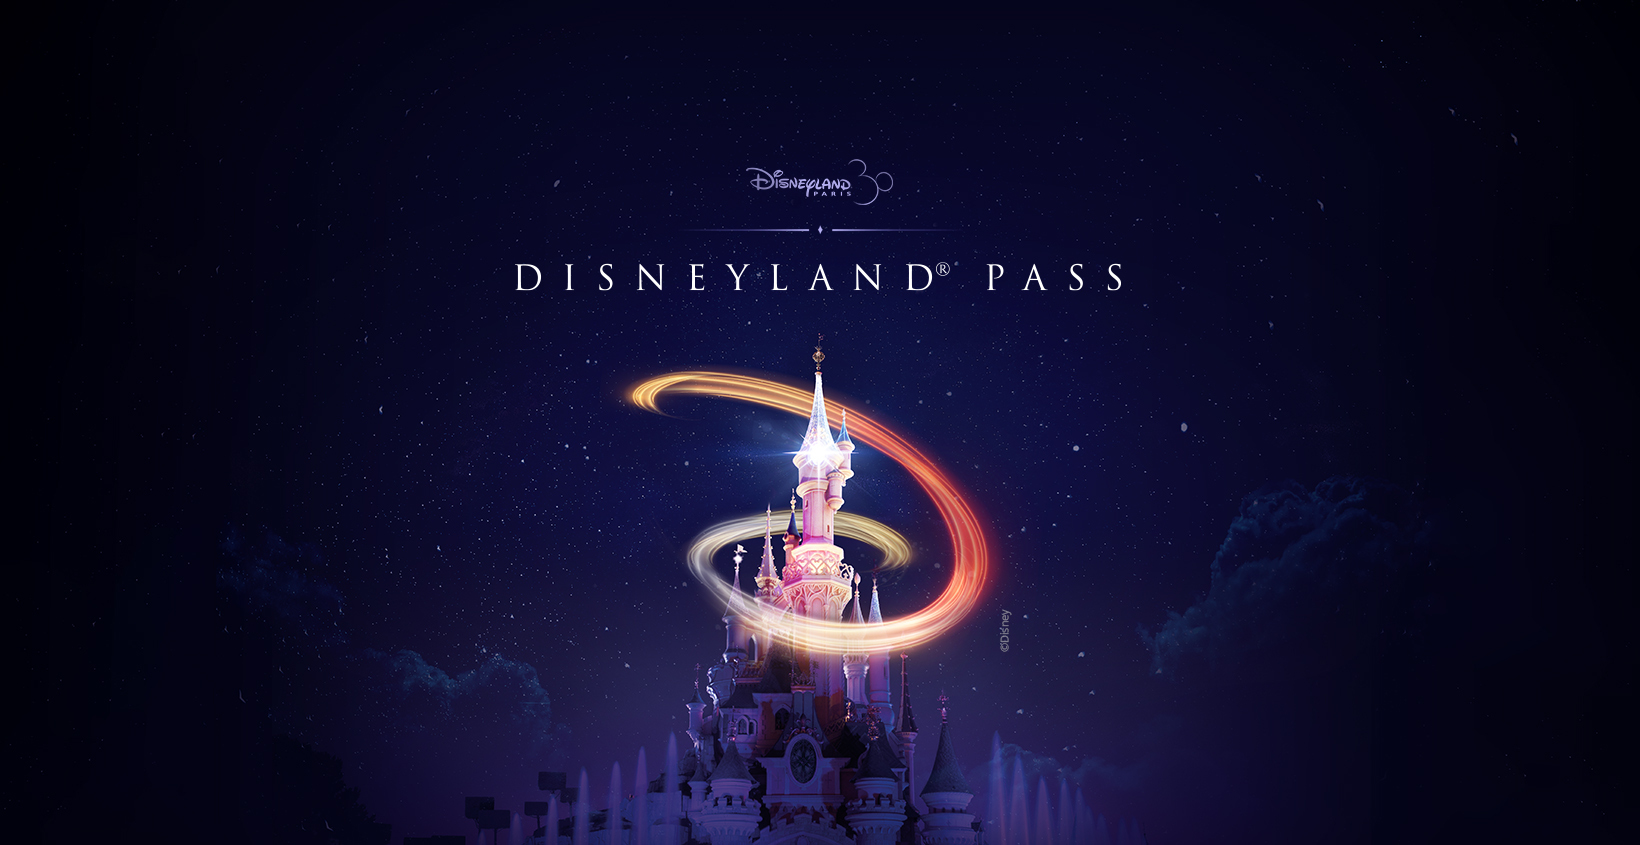 Nouvelle Gamme de Passeports ... Disneyland Pass  - Page 2 Fnsn